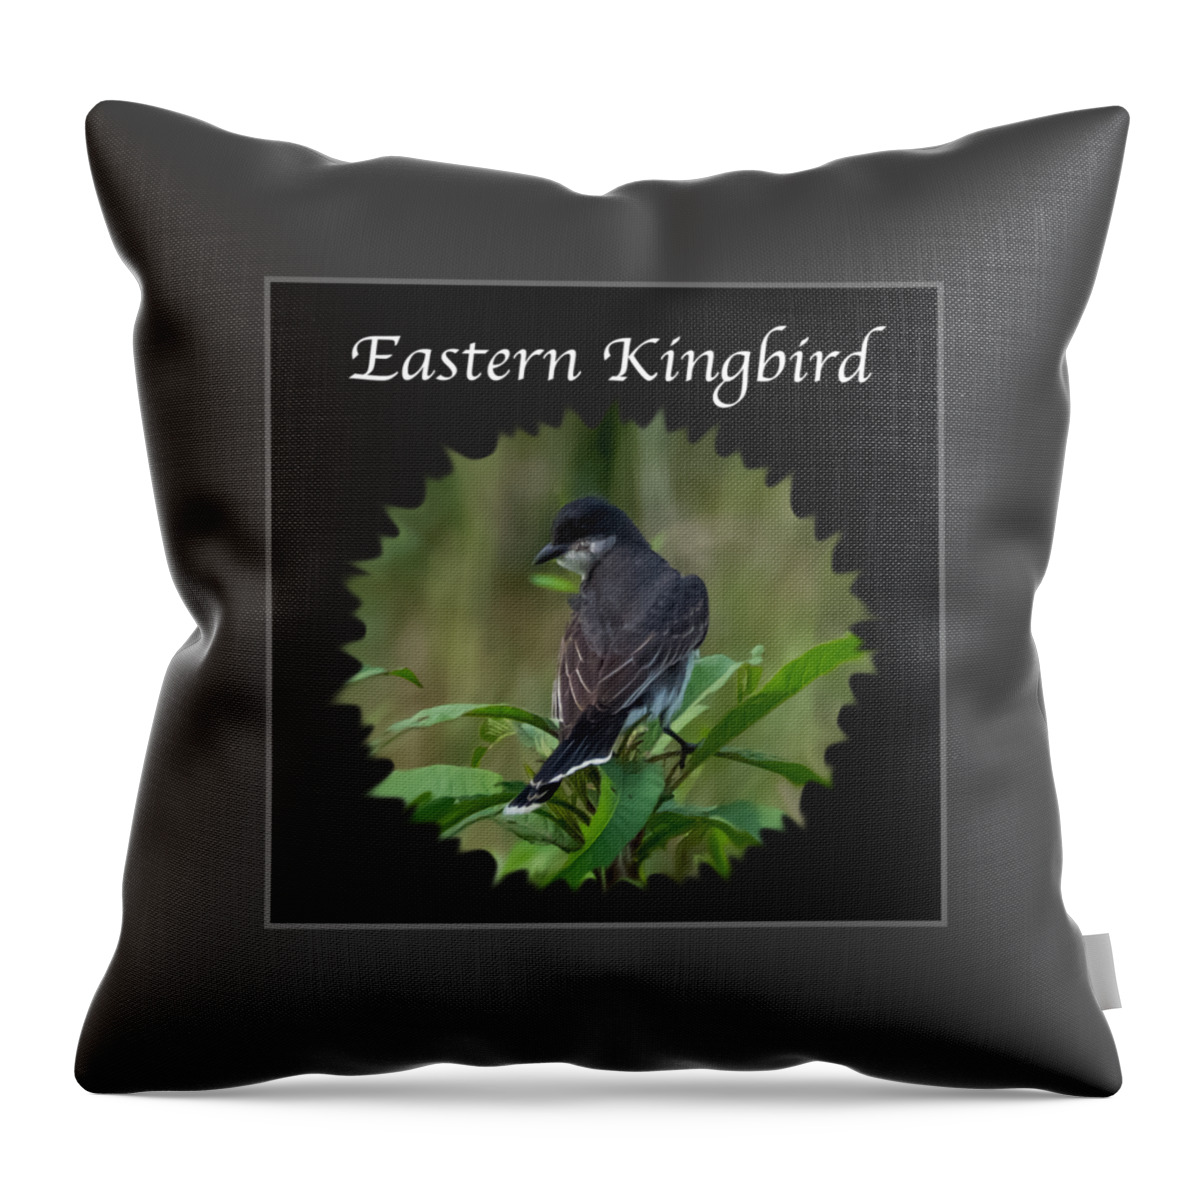 Eastern Kingbird Throw Pillow featuring the photograph Eastern Kingbird by Holden The Moment